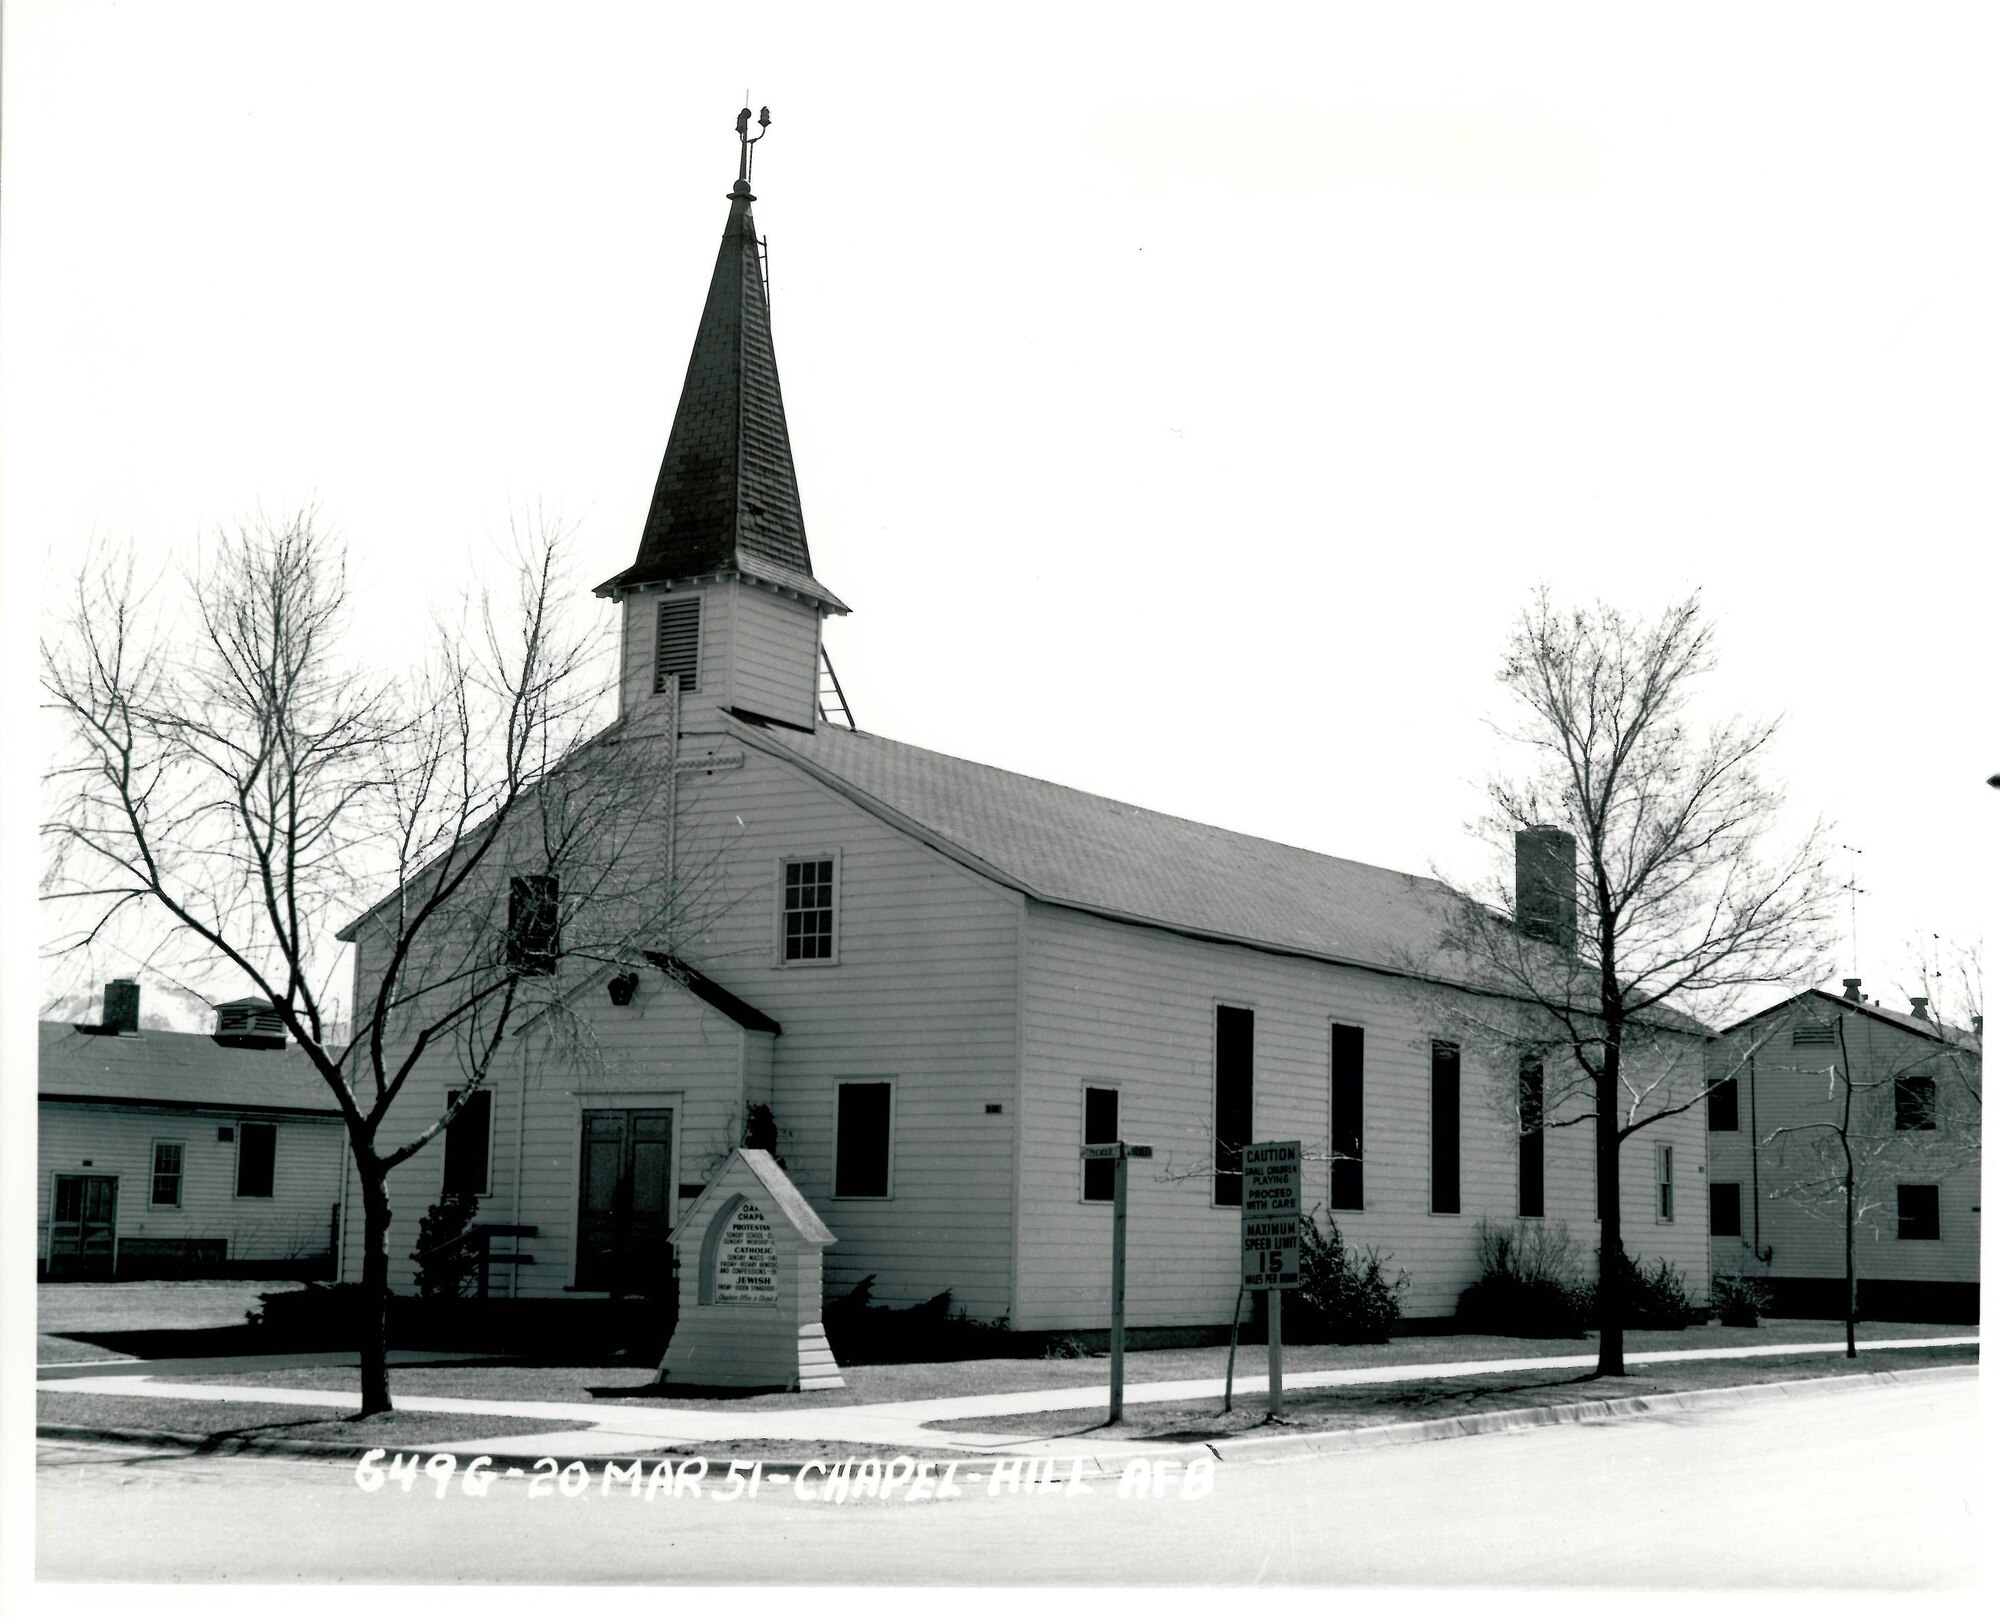 The original 1942 Hill Chapel, now located at the Hill Aerospace Museum, is getting a facelift, with renovations being done on the exterior building that will make the chapel more visually appealing and historical.